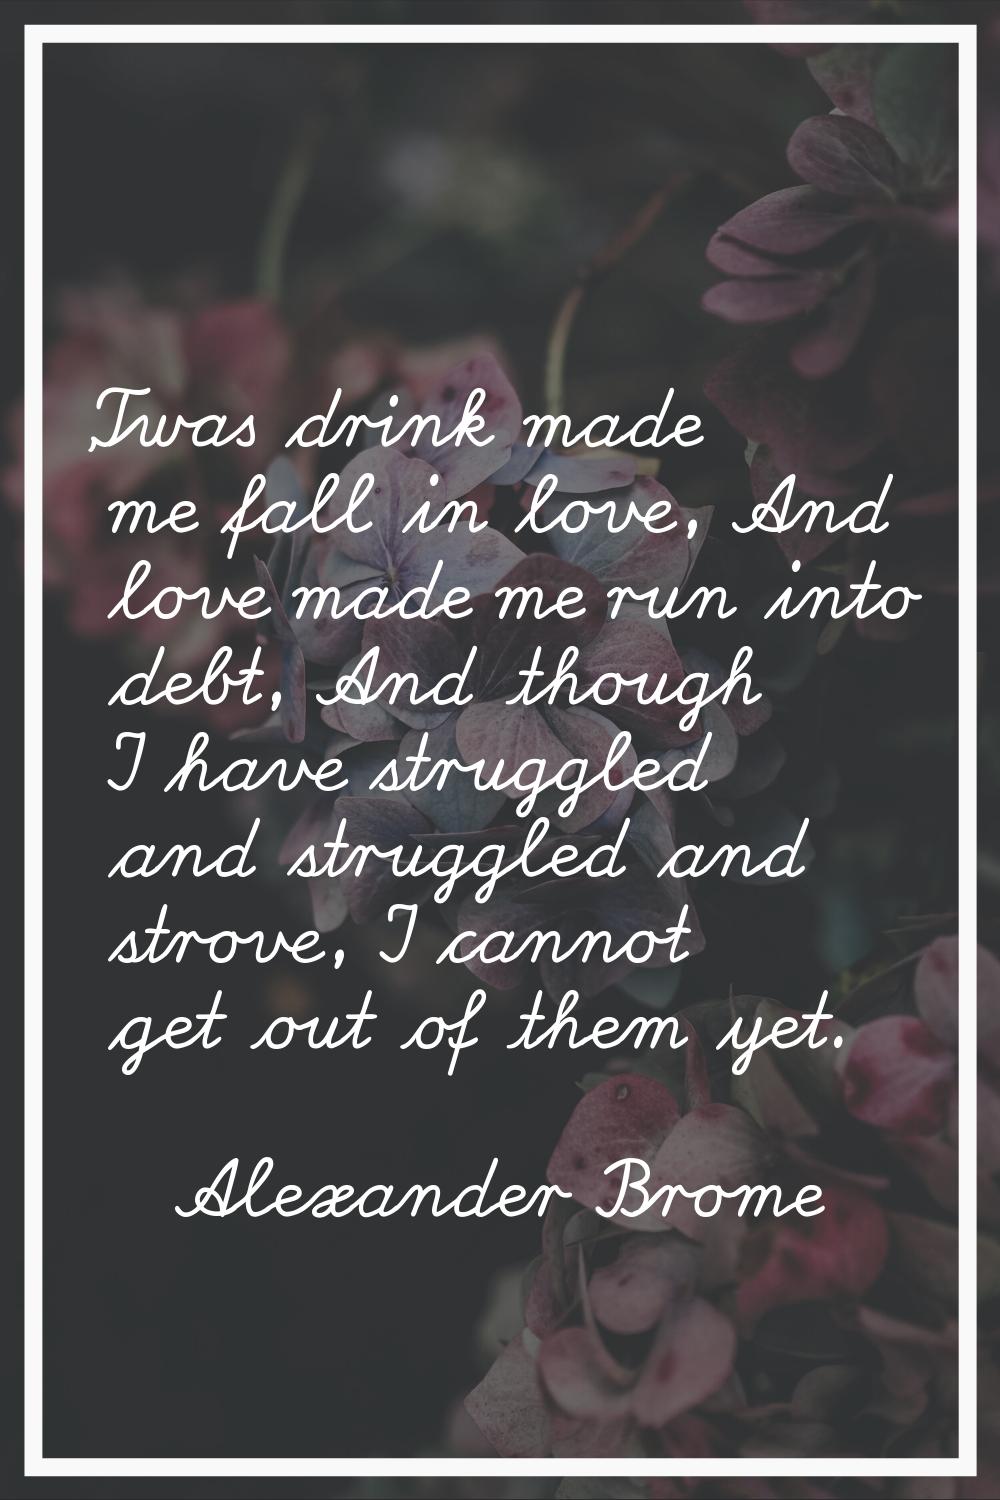 'Twas drink made me fall in love, And love made me run into debt, And though I have struggled and s